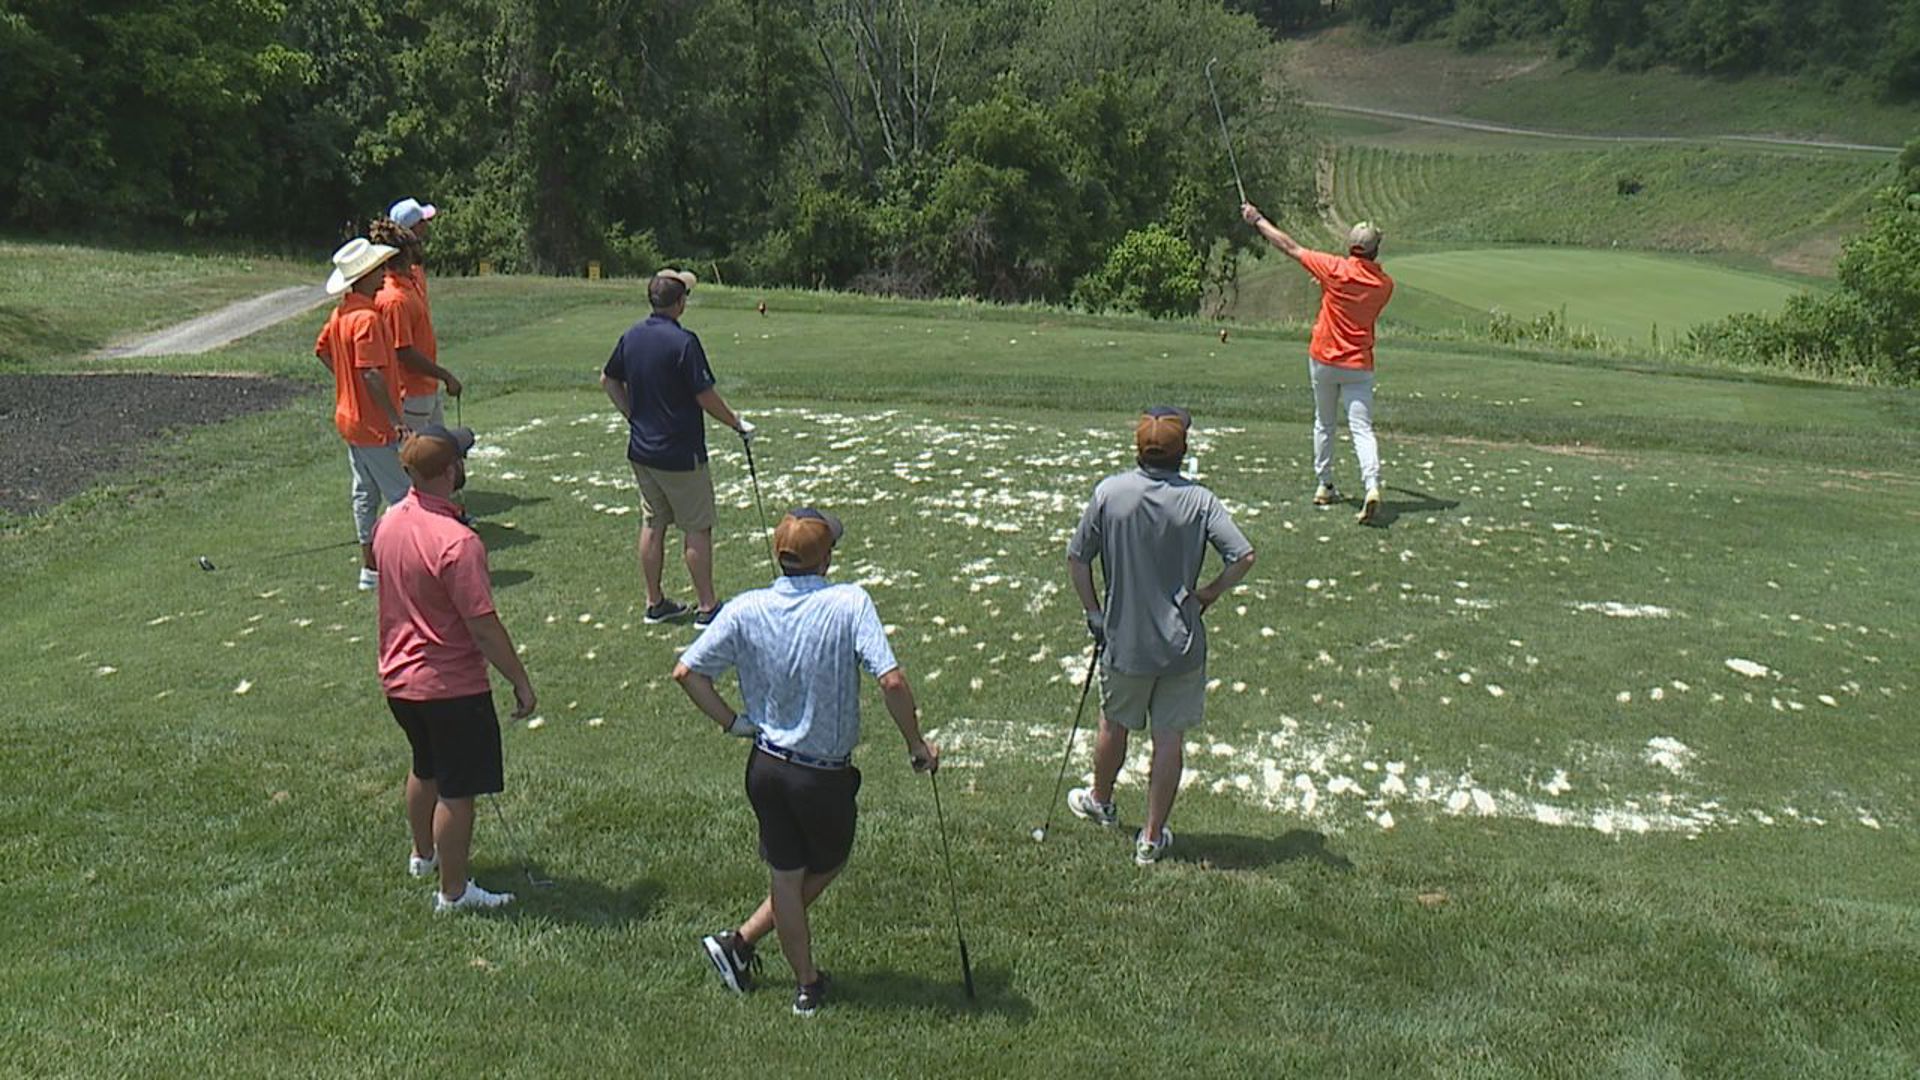 Monday’s heat didn’t stop some people teeing off at their local golf course.